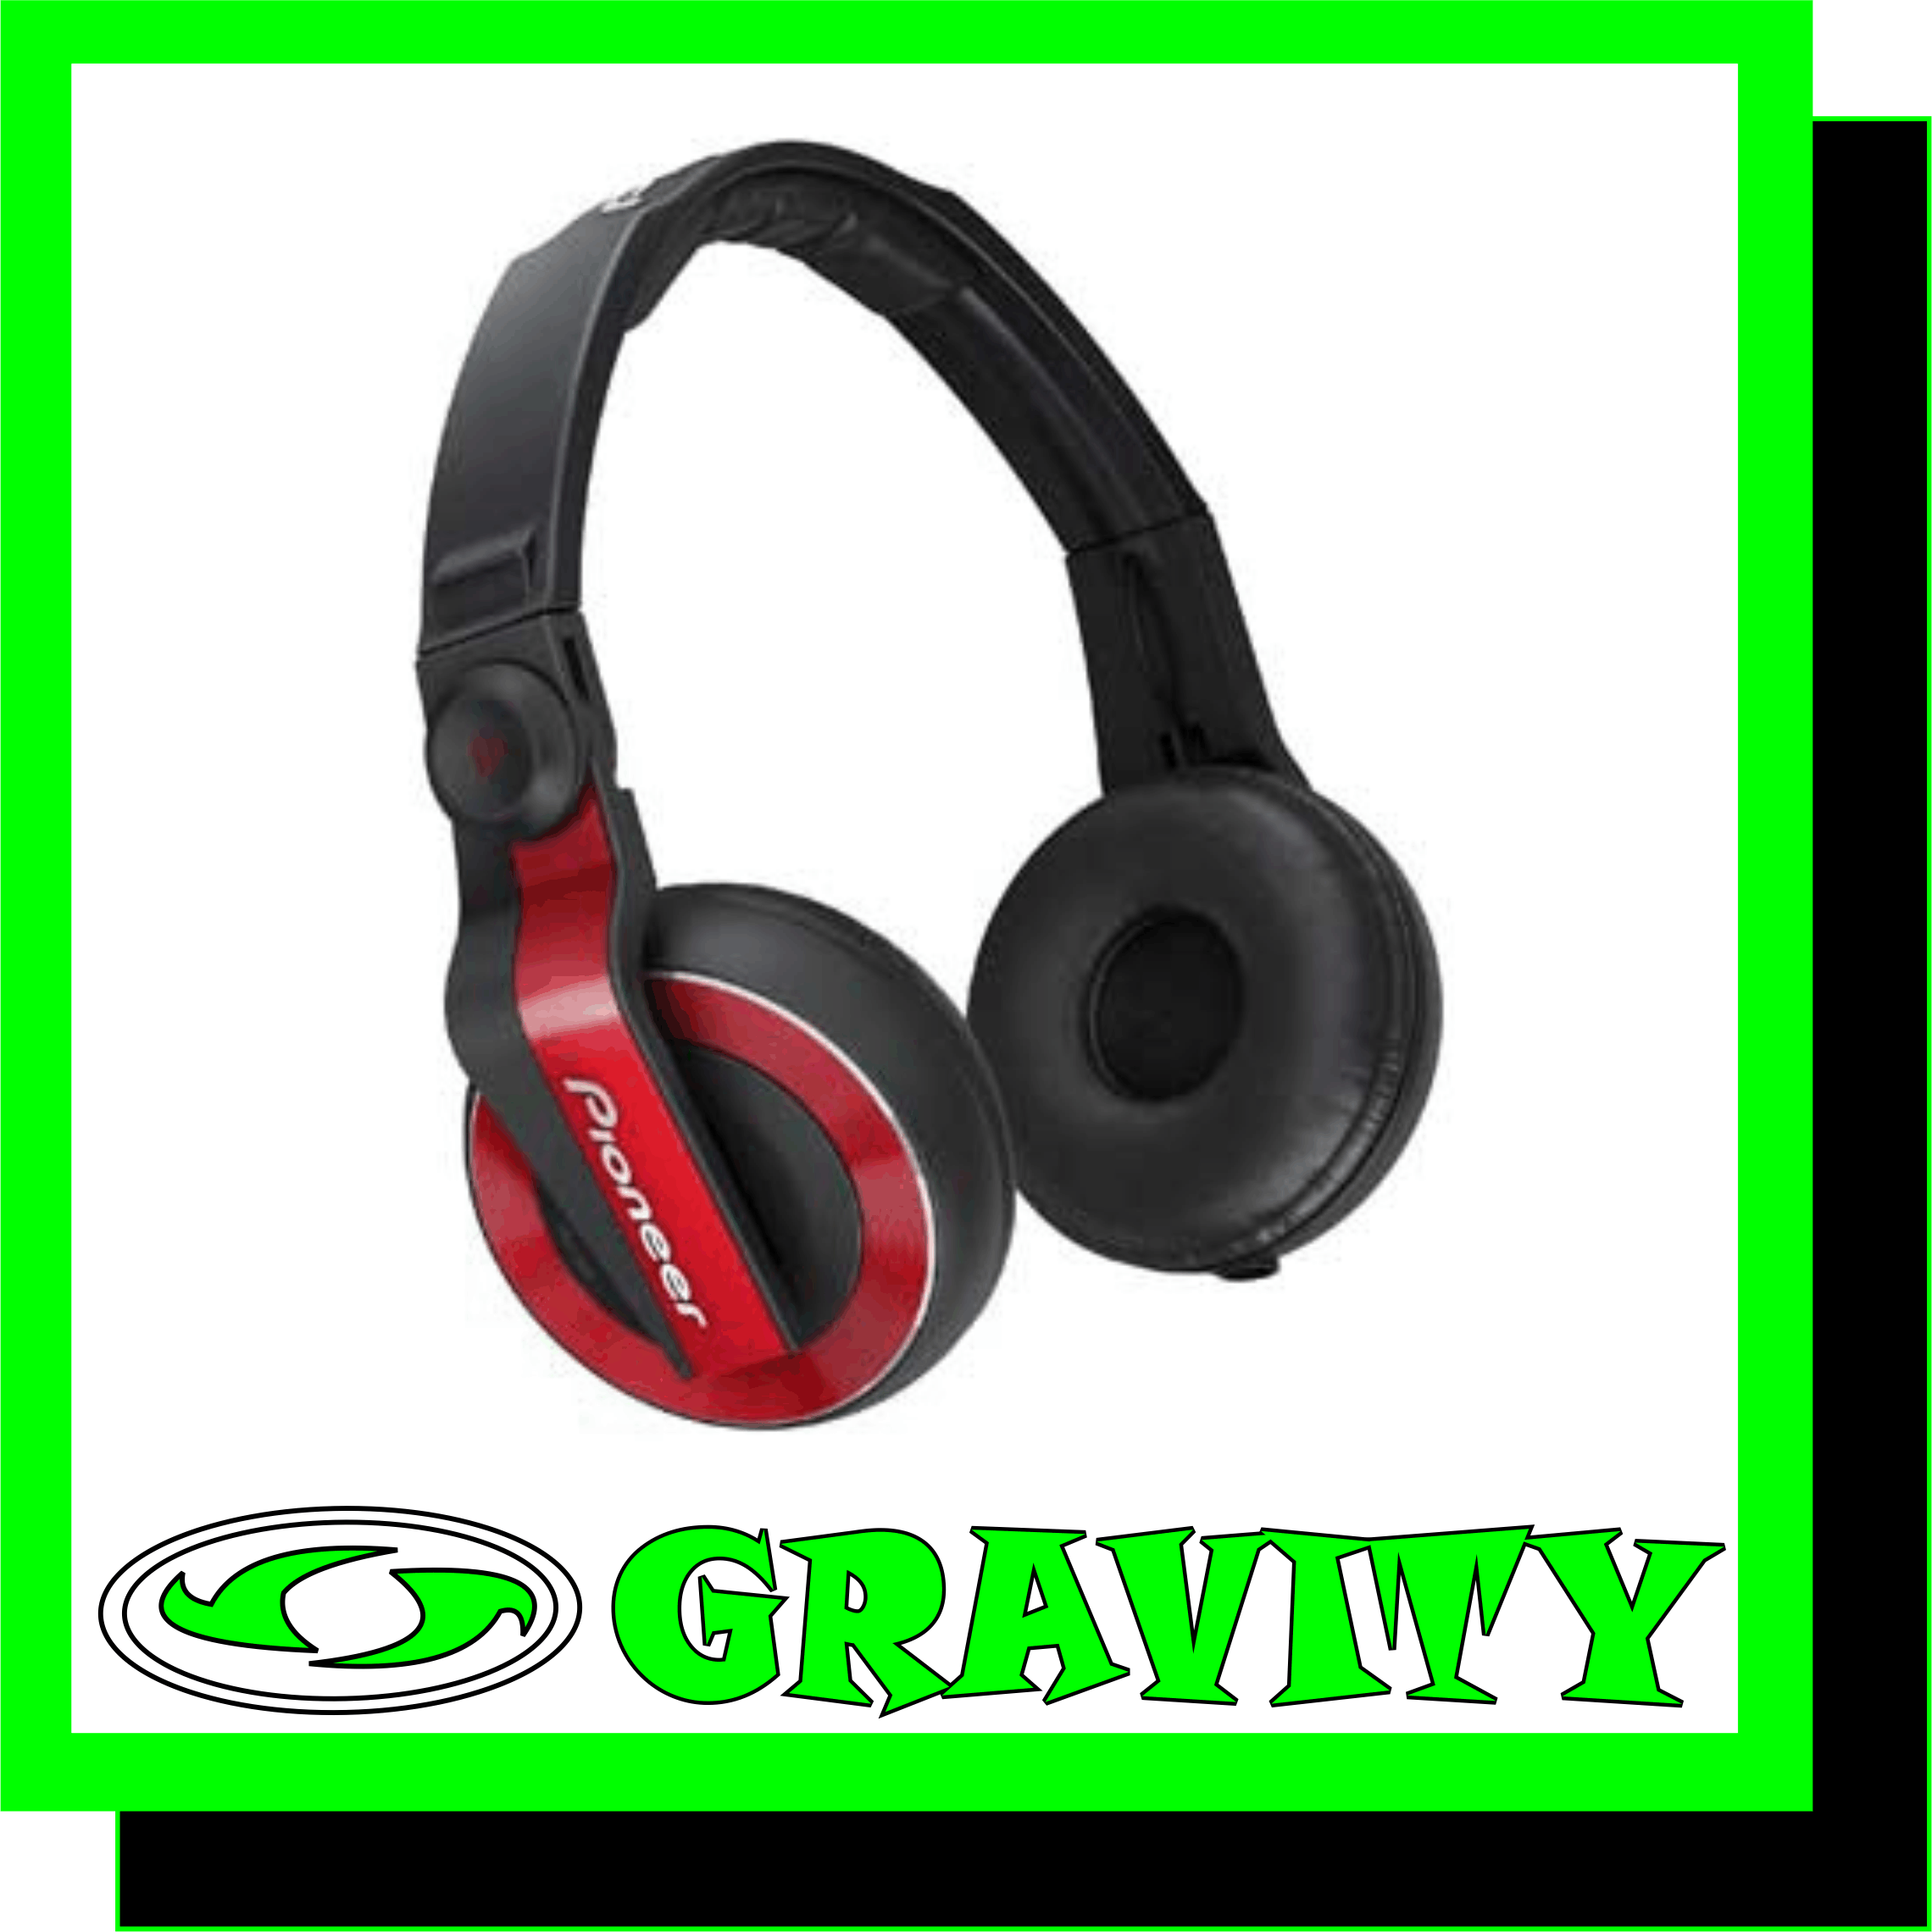 HDJ500R @ R2 350.00  DJ Headphones   Refined Design for Maximum Comfort & Reliability Advanced Sound Quality with low & mid ranges Right earpiece rotates forward and back up to 60 degrees Includes 1m straight leisure cord & coiled DJing cord GRAVITY DJ STORE 0315072736